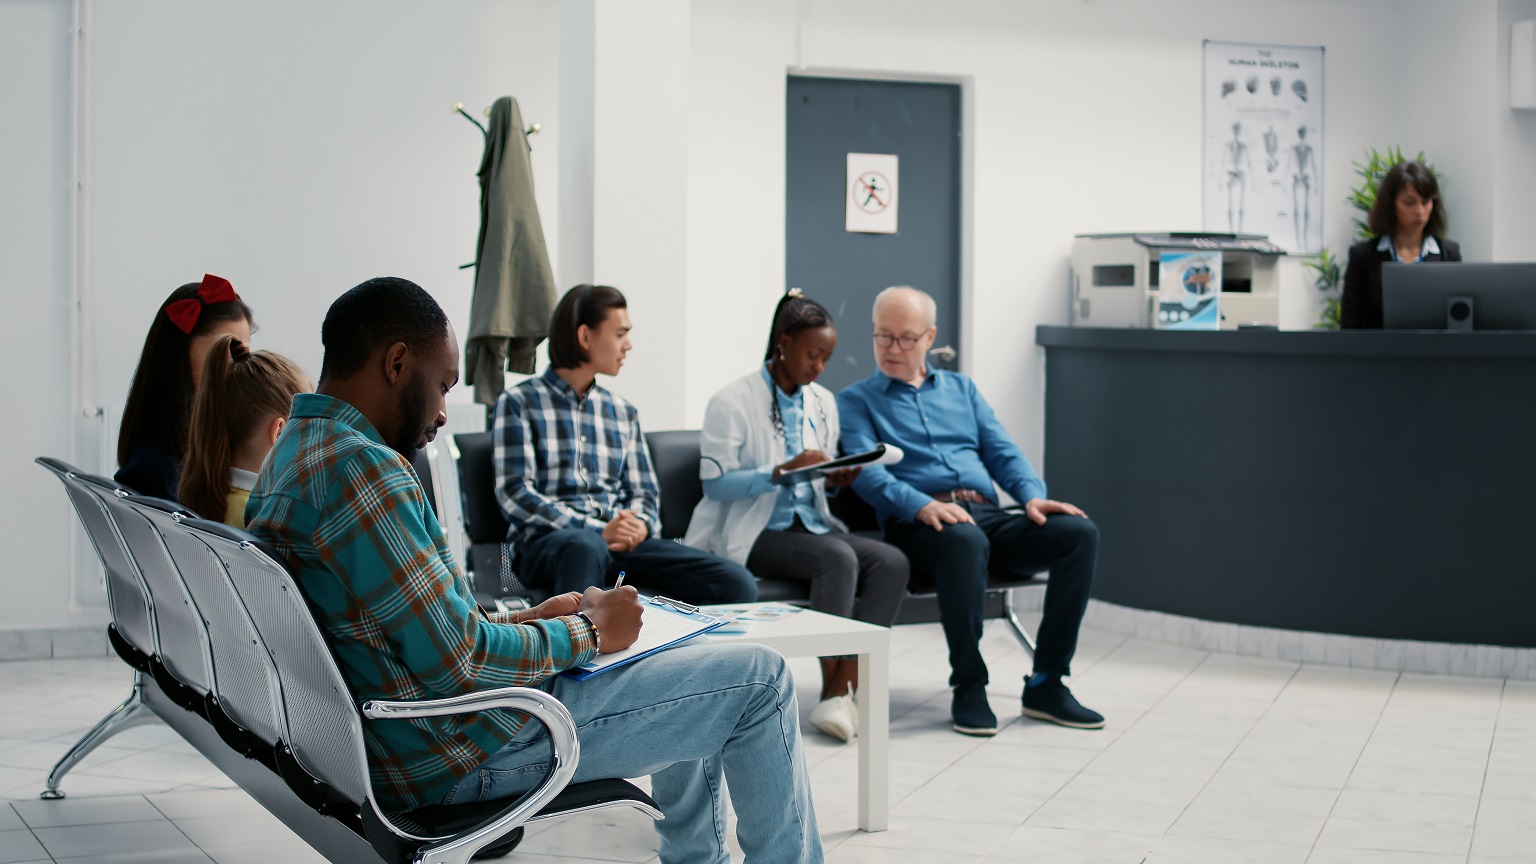 Patients in the waiting room area